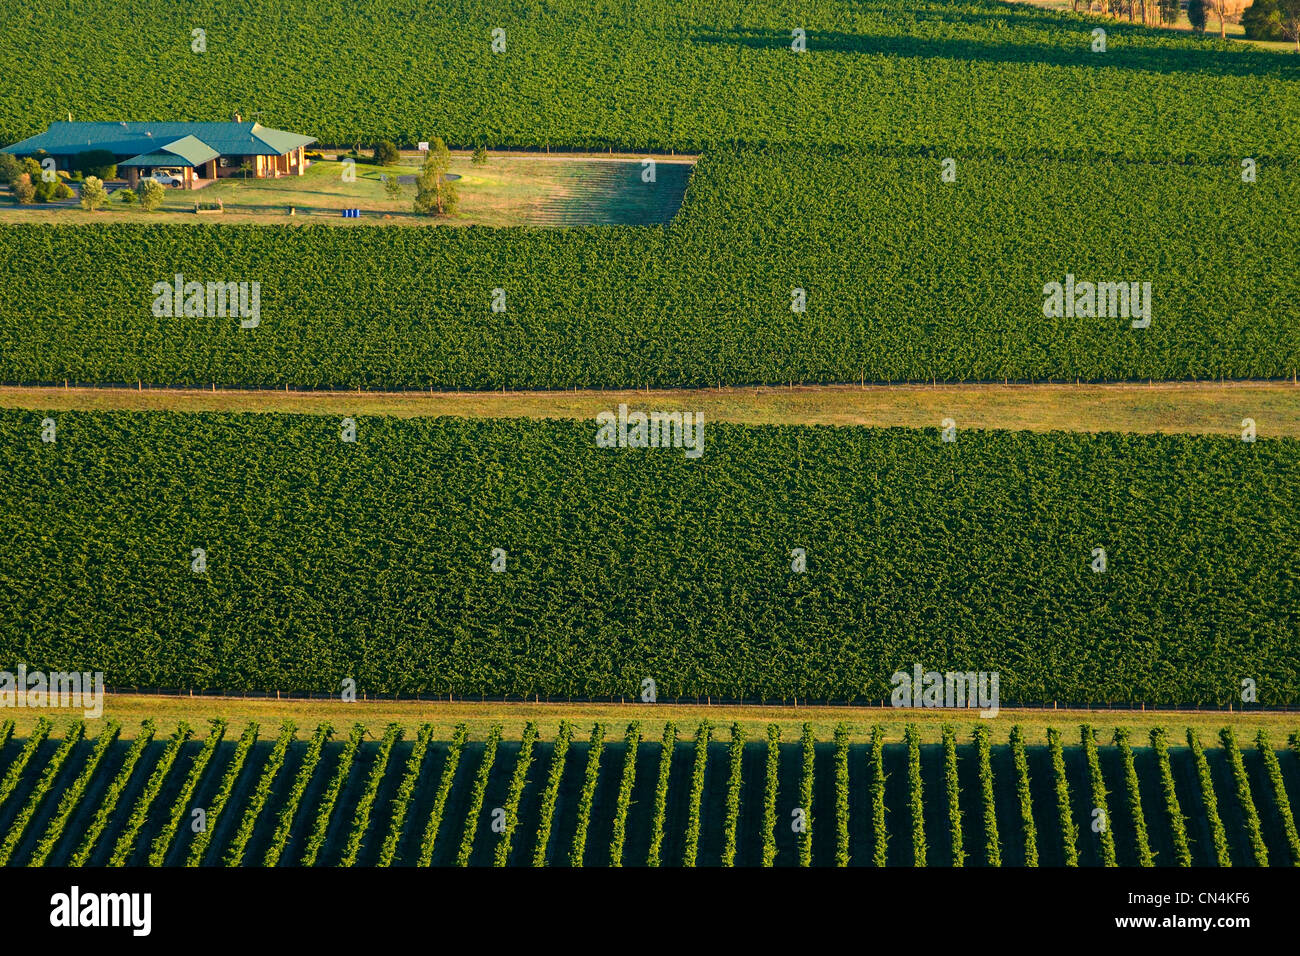 Australia, Victoria, wine-producing region of Yarra Valley at north east of Melbourne, landscape seen from hot air ballon Stock Photo